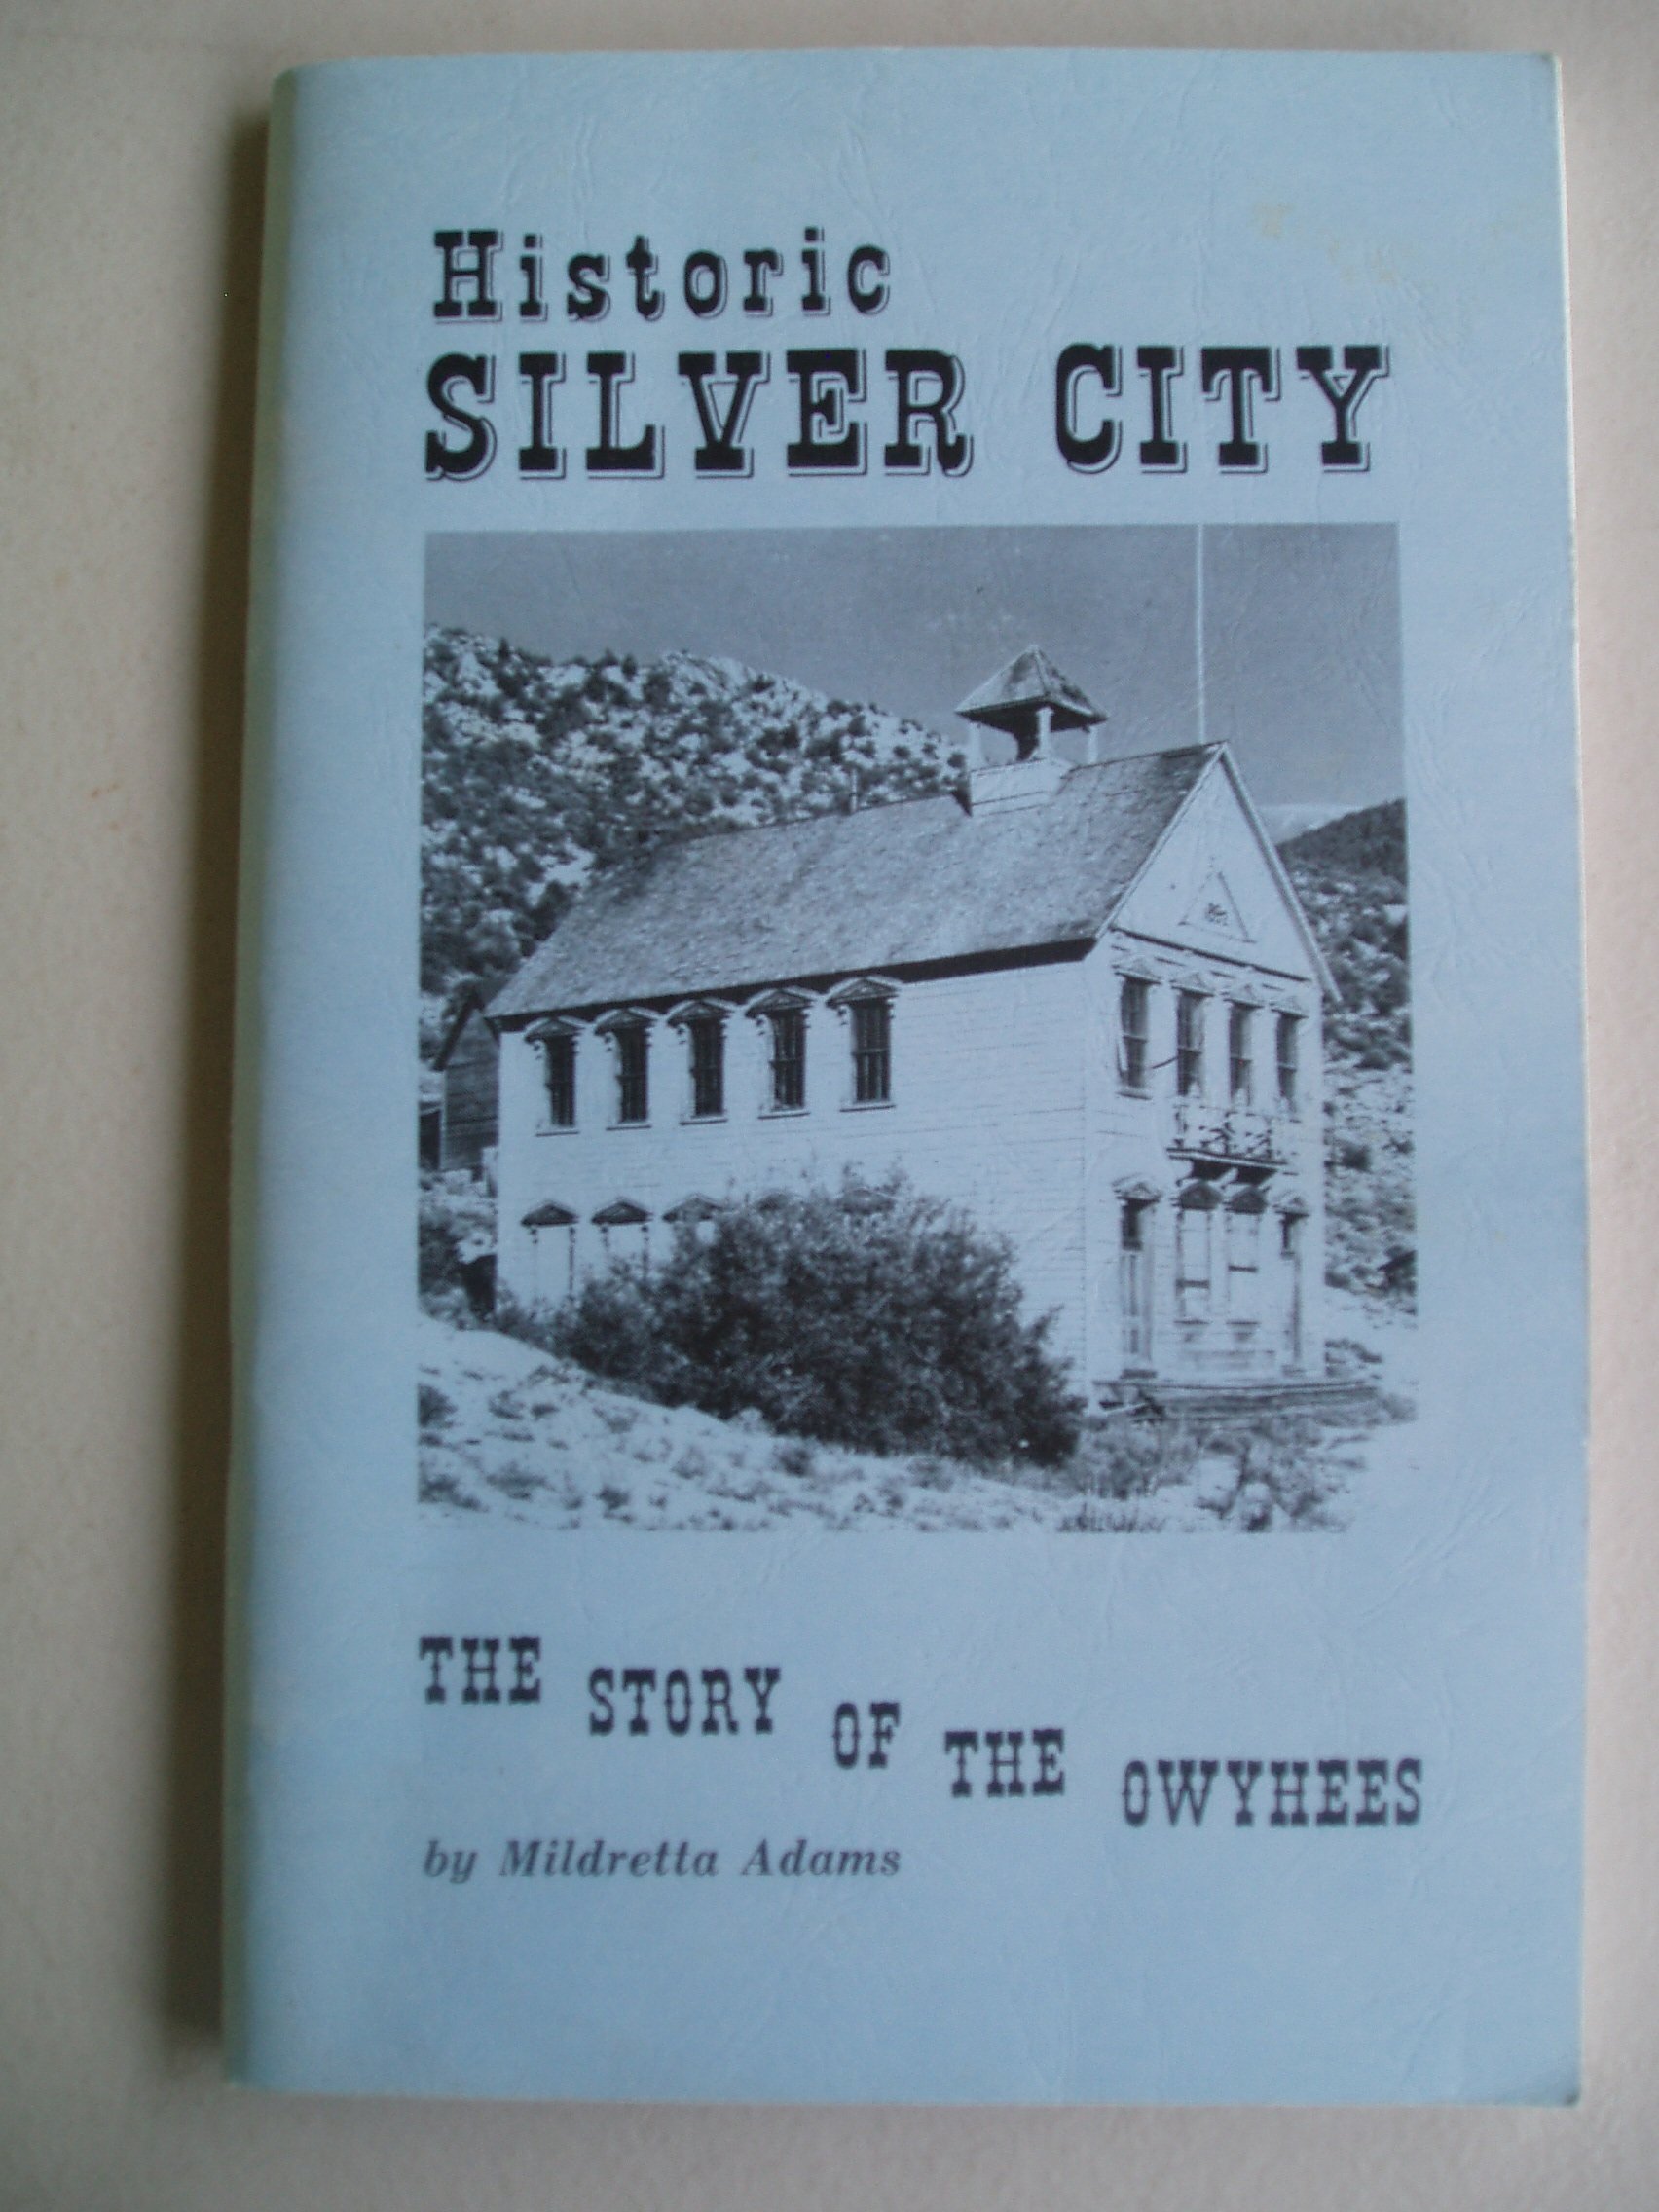 Historic Silver City: The story of the Owyhees (book cover)